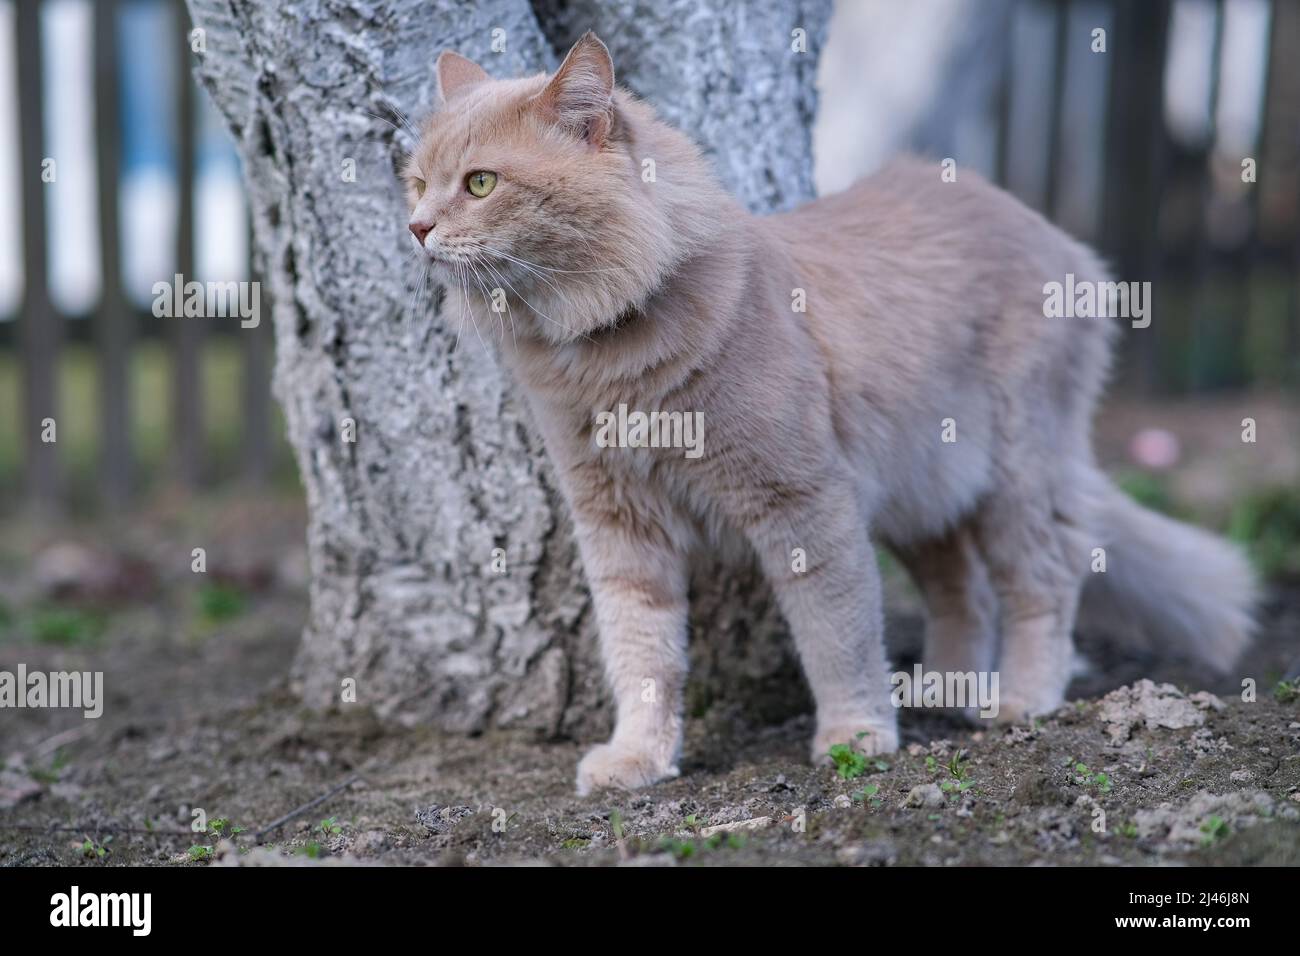 A light red fluffy cat is standing near a tree. Stock Photo